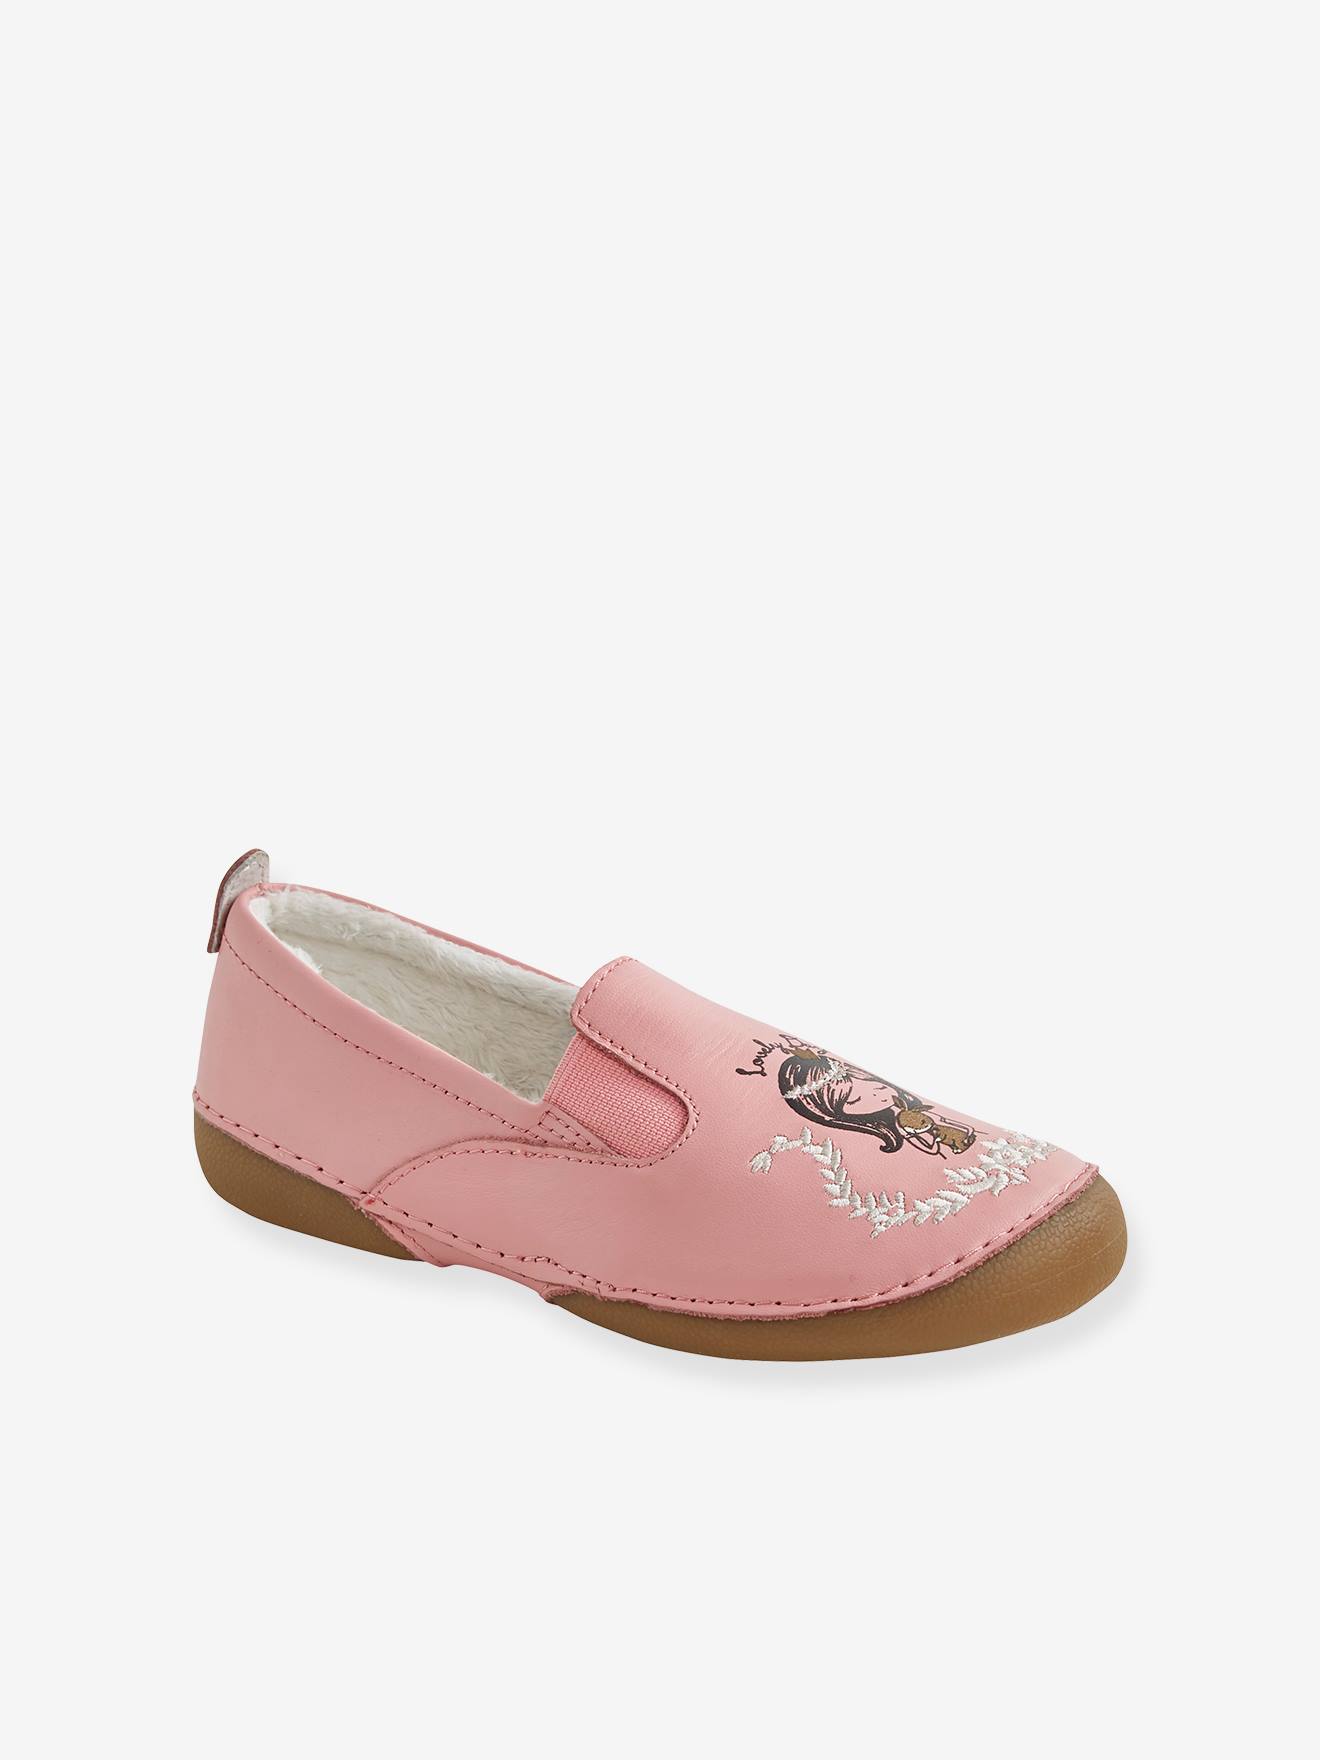 leather slippers for girls